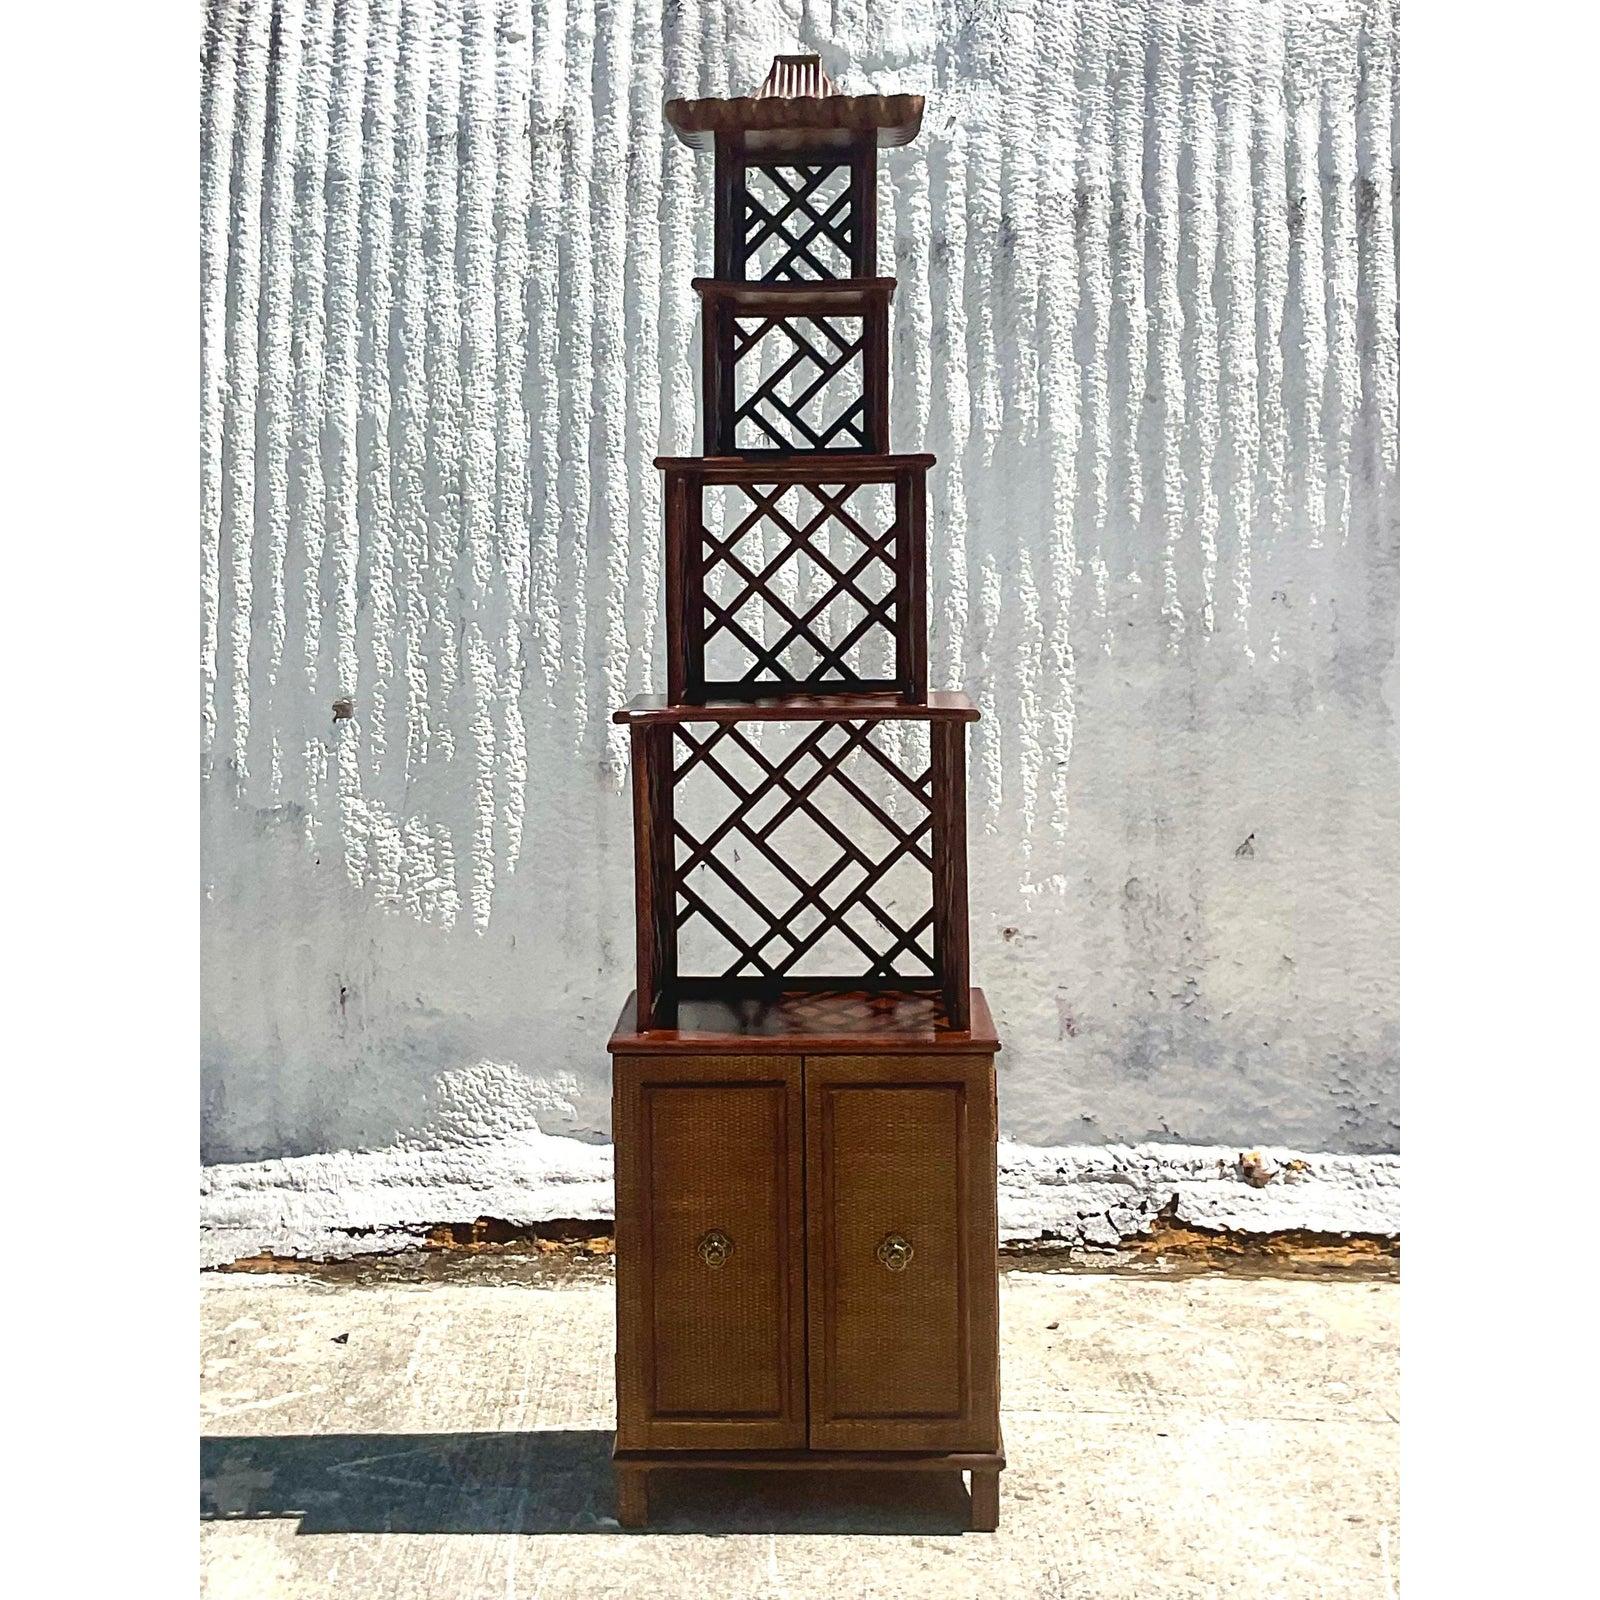 Fantastic vintage Asian Pagoda Etagere. Iconic Chinese Chippendale design. Woven rattan base with brass hardware. Acquired from a Palm Beach estate.